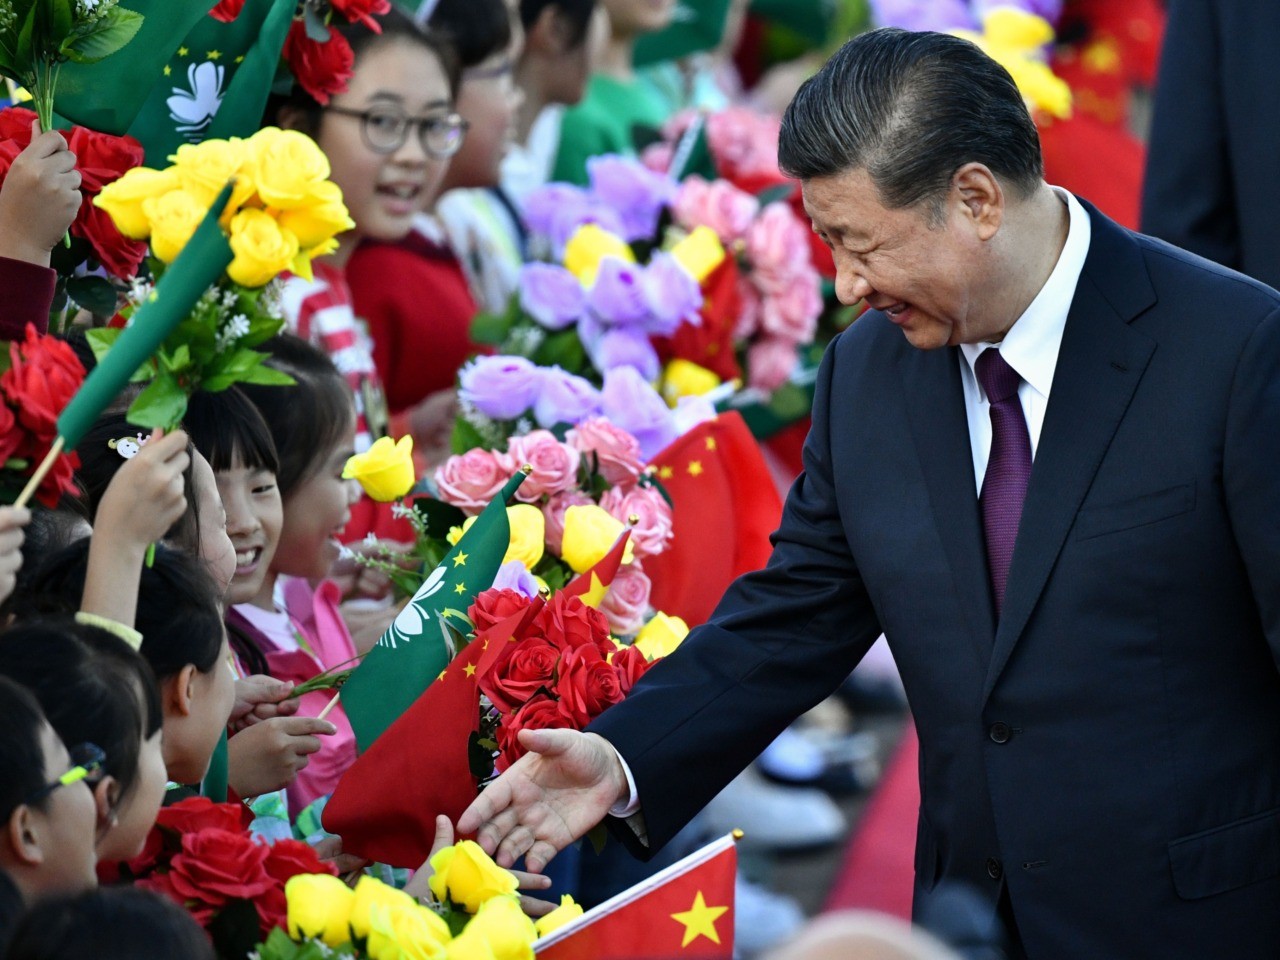 Chinese President Xi Jinping greets children waving the flags of China and Macau upon his arrival at Macau International Airport in Macau on December 18, 2019, ahead of celebrations for the 20th anniversary of Portugal's handover to China.  - Chinese President Xi Jinping touched down in Macau on Dec. 18 as the city prepares to mark 20 years since the return of the former Portuguese colony, a celebration that contrasts sharply with months of unrest in neighboring Hong Kong.  (Photo by Anthony WALLACE/AFP) (Photo by ANTHONY WALLACE/AFP via Getty Images)